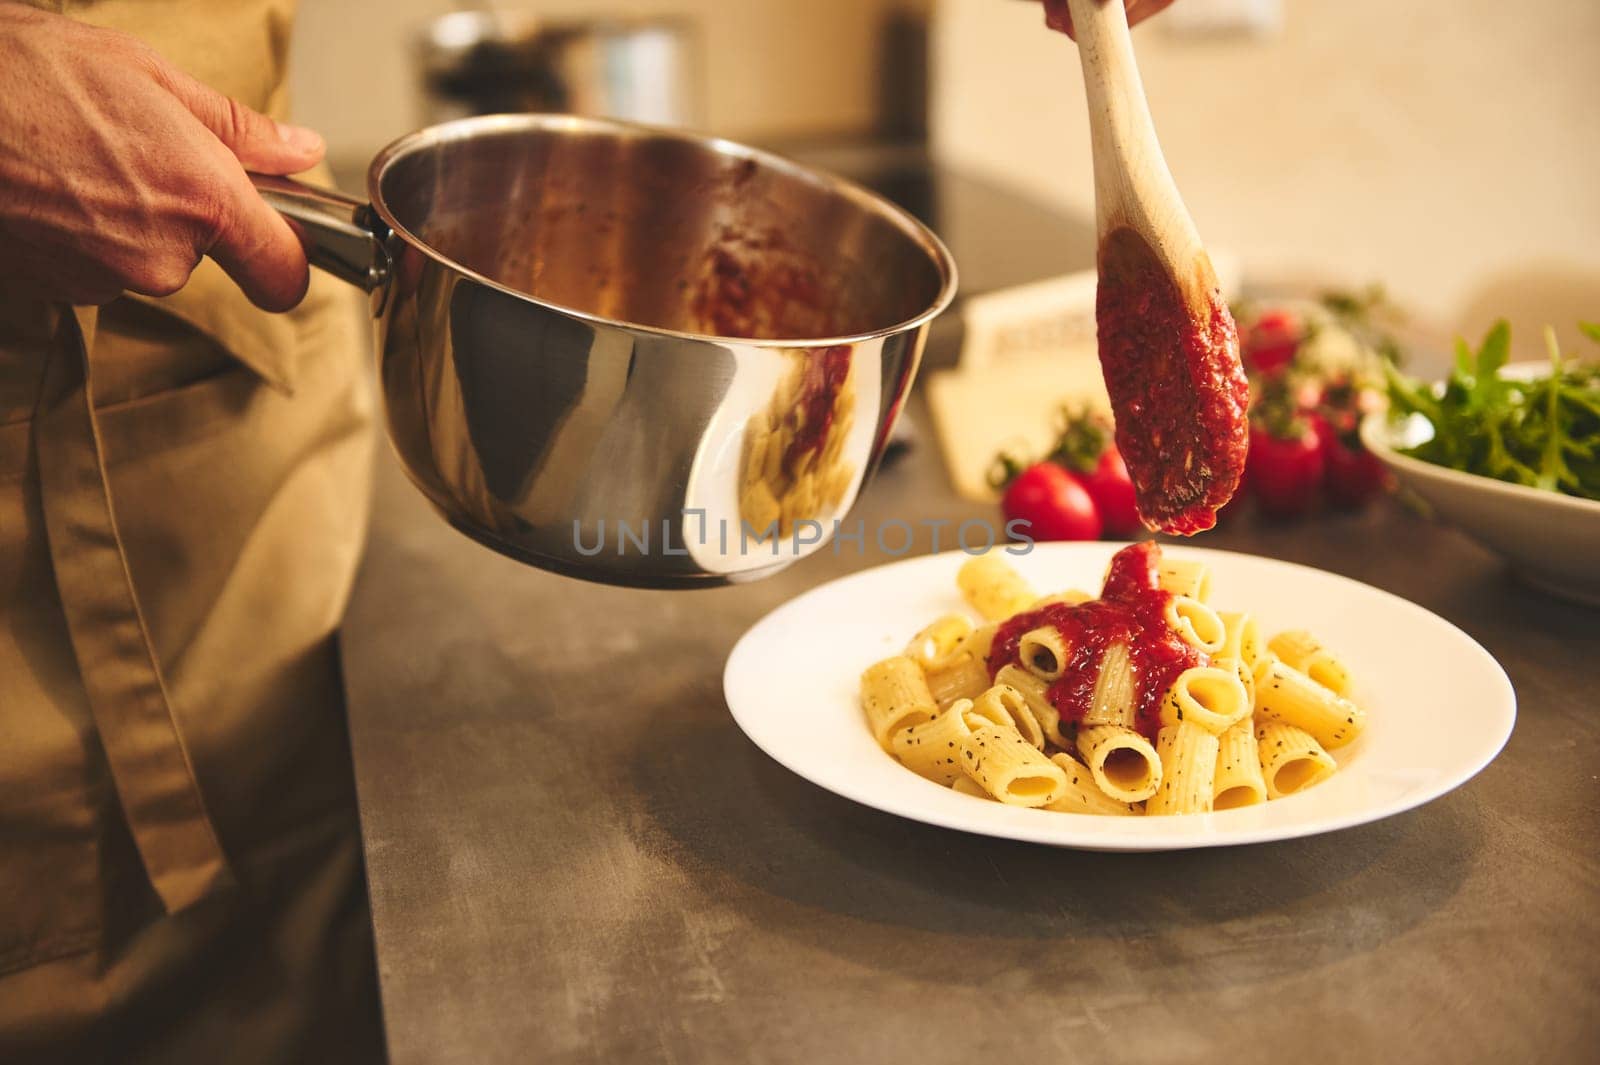 Hands of a man holding a stainless steel pan and pouring tomato sauce on pasta, cooking dinner at modern home kitchen by artgf